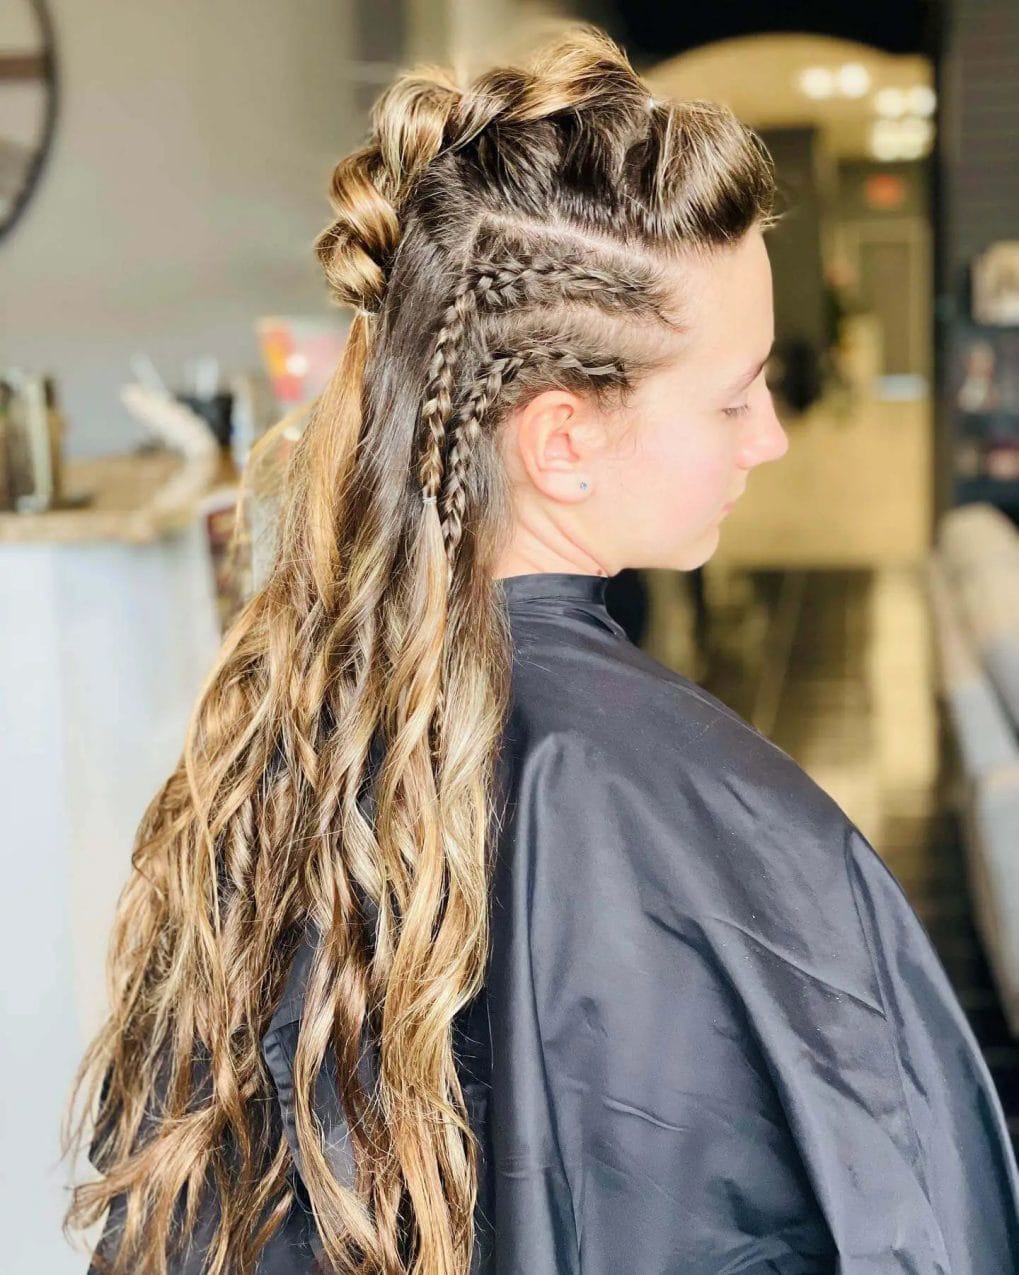 Deep brown and blonde Viking braids contrasted with loose waves.